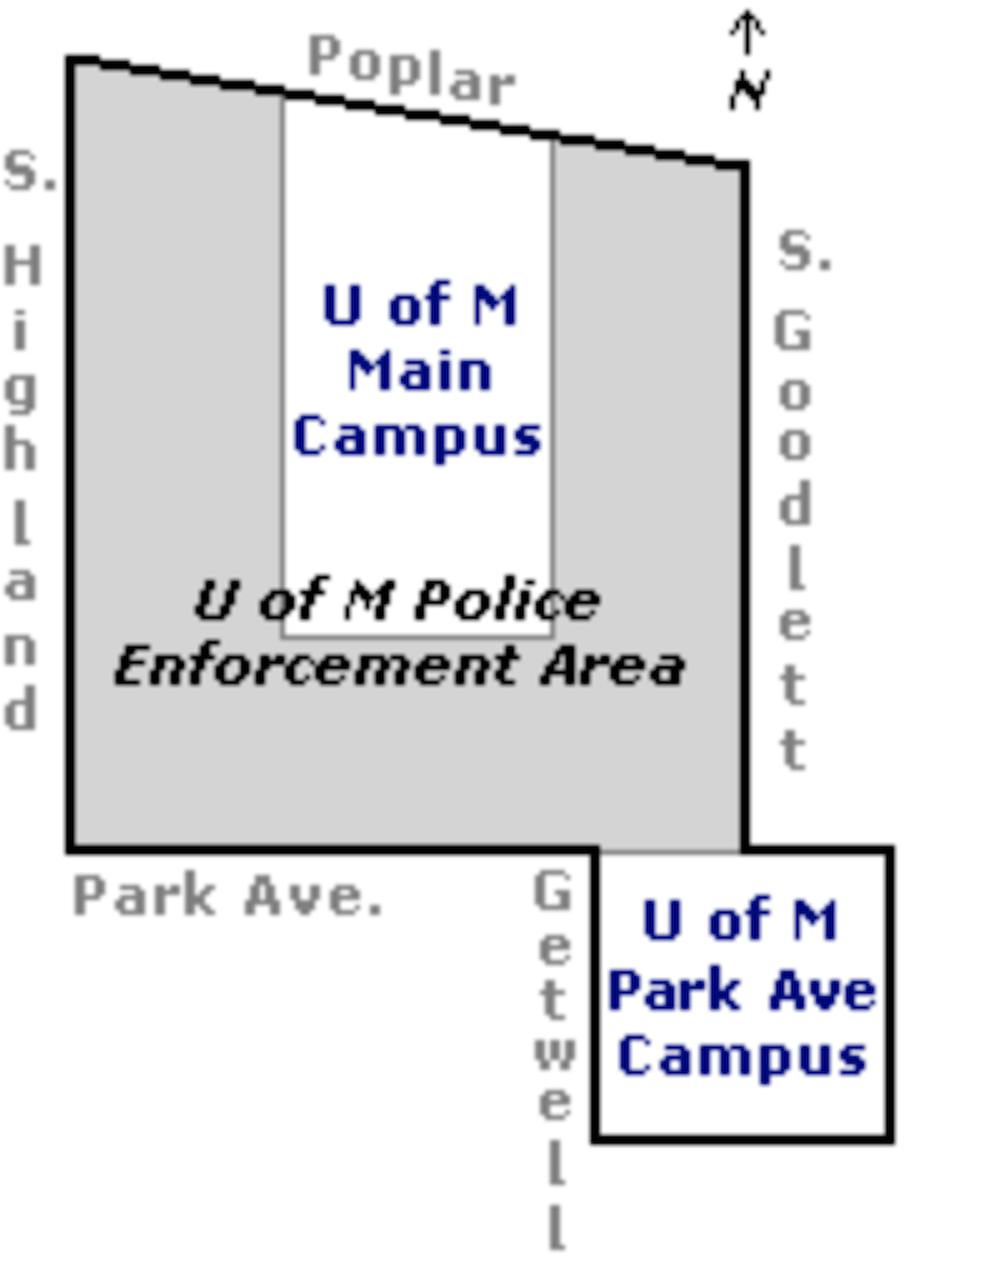 <p>Shown above is the UofM Police Services enforcement area. The boundaries end at Highland, Poplar, Goodlett, Park and Getwell, but also extend to the Park Ave. campus – often called South Campus.</p>